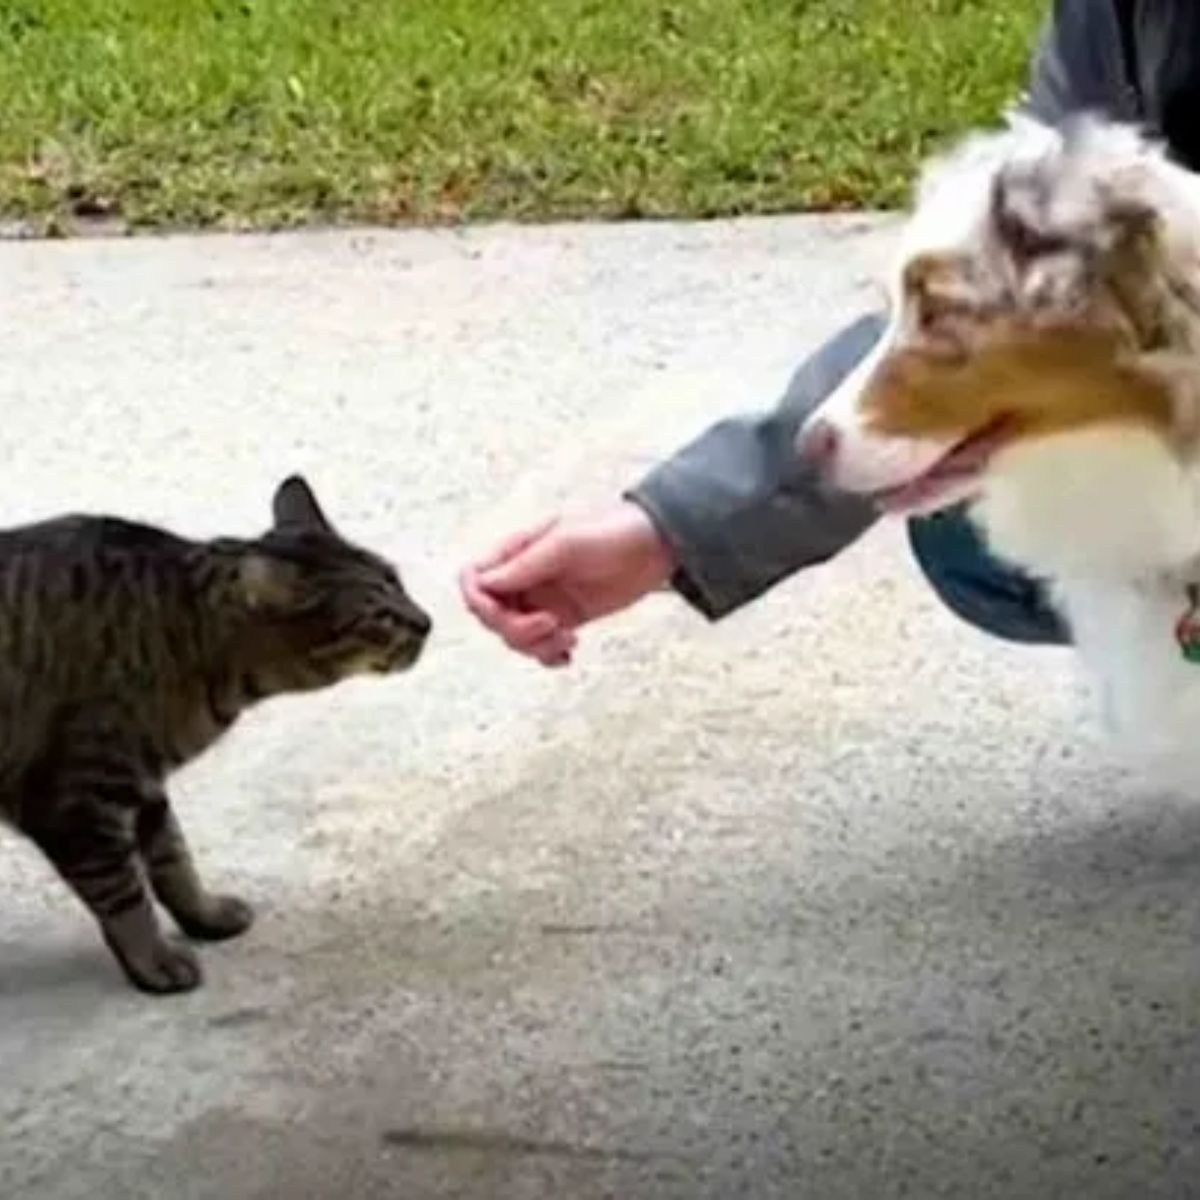 cat and dog looking at each other